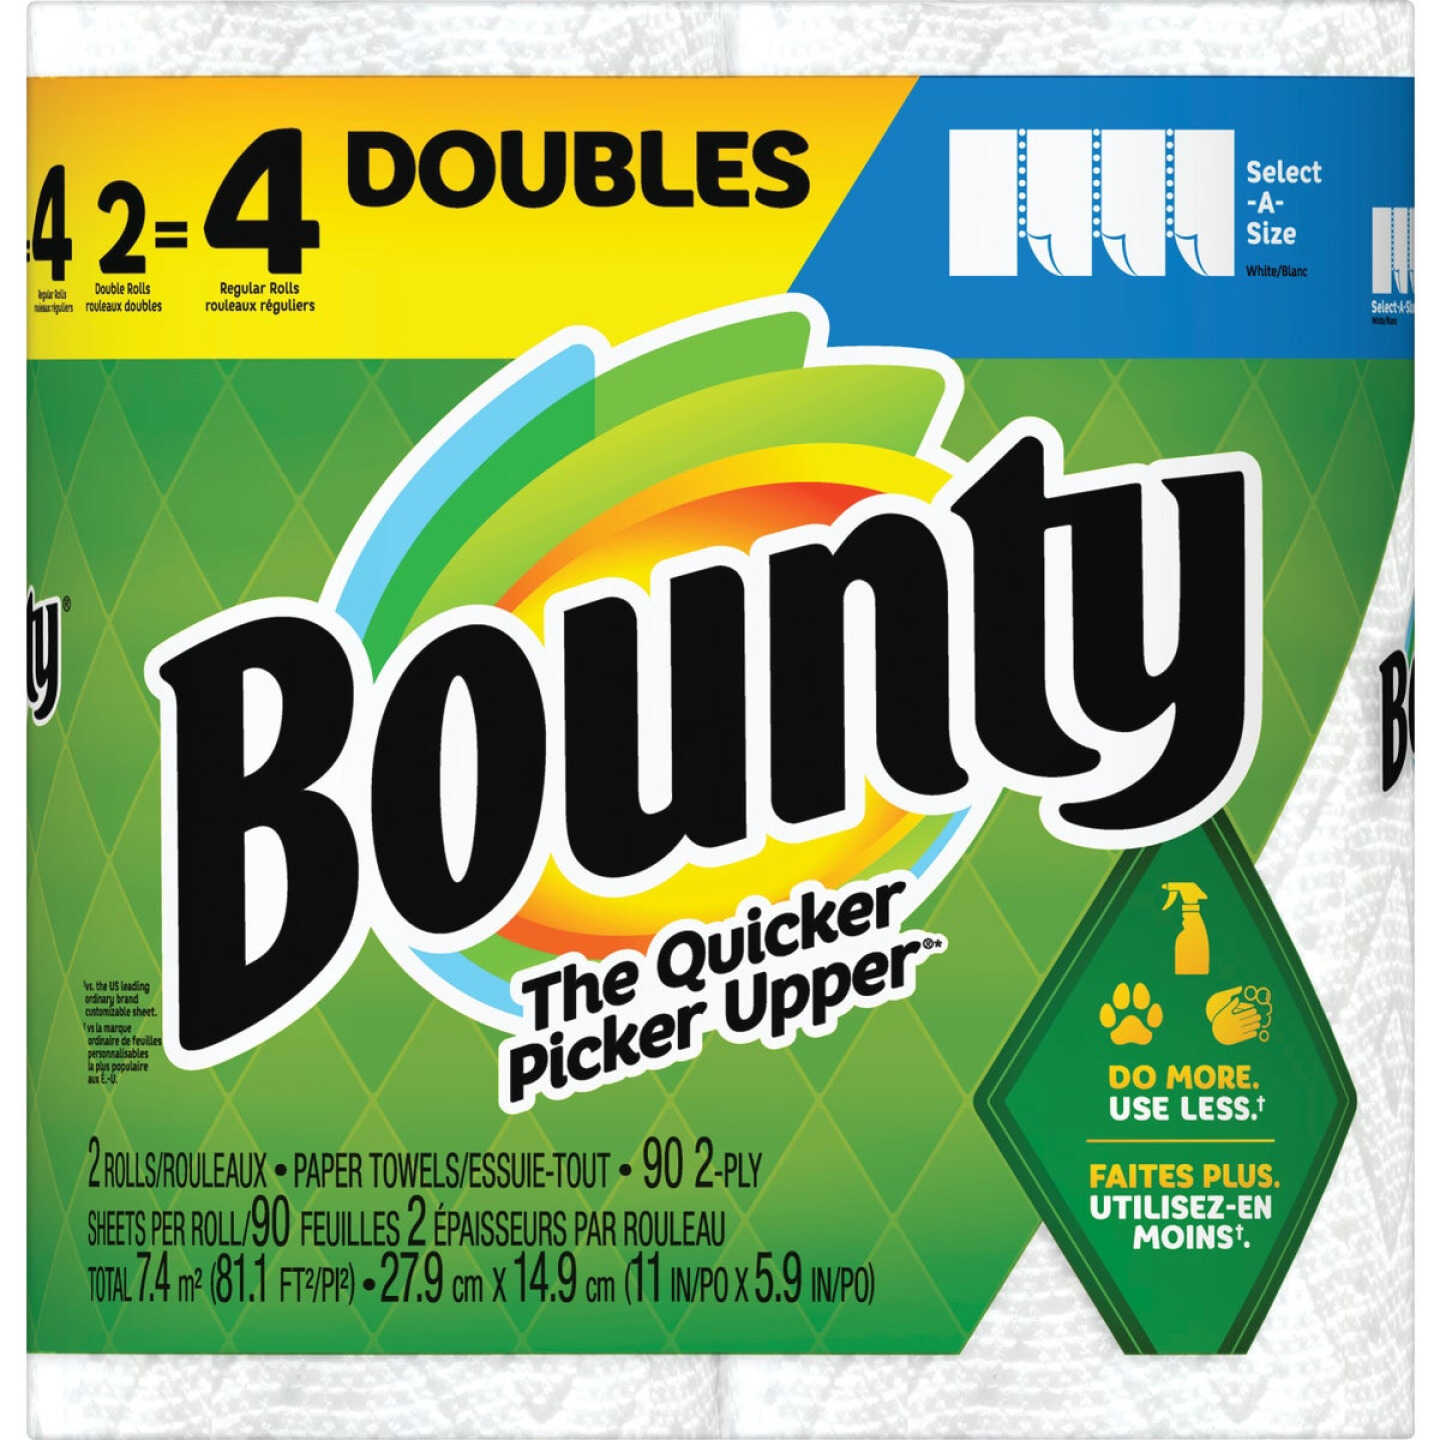 Bounty Select-A-Size Paper Towels - 12 Rolls - White